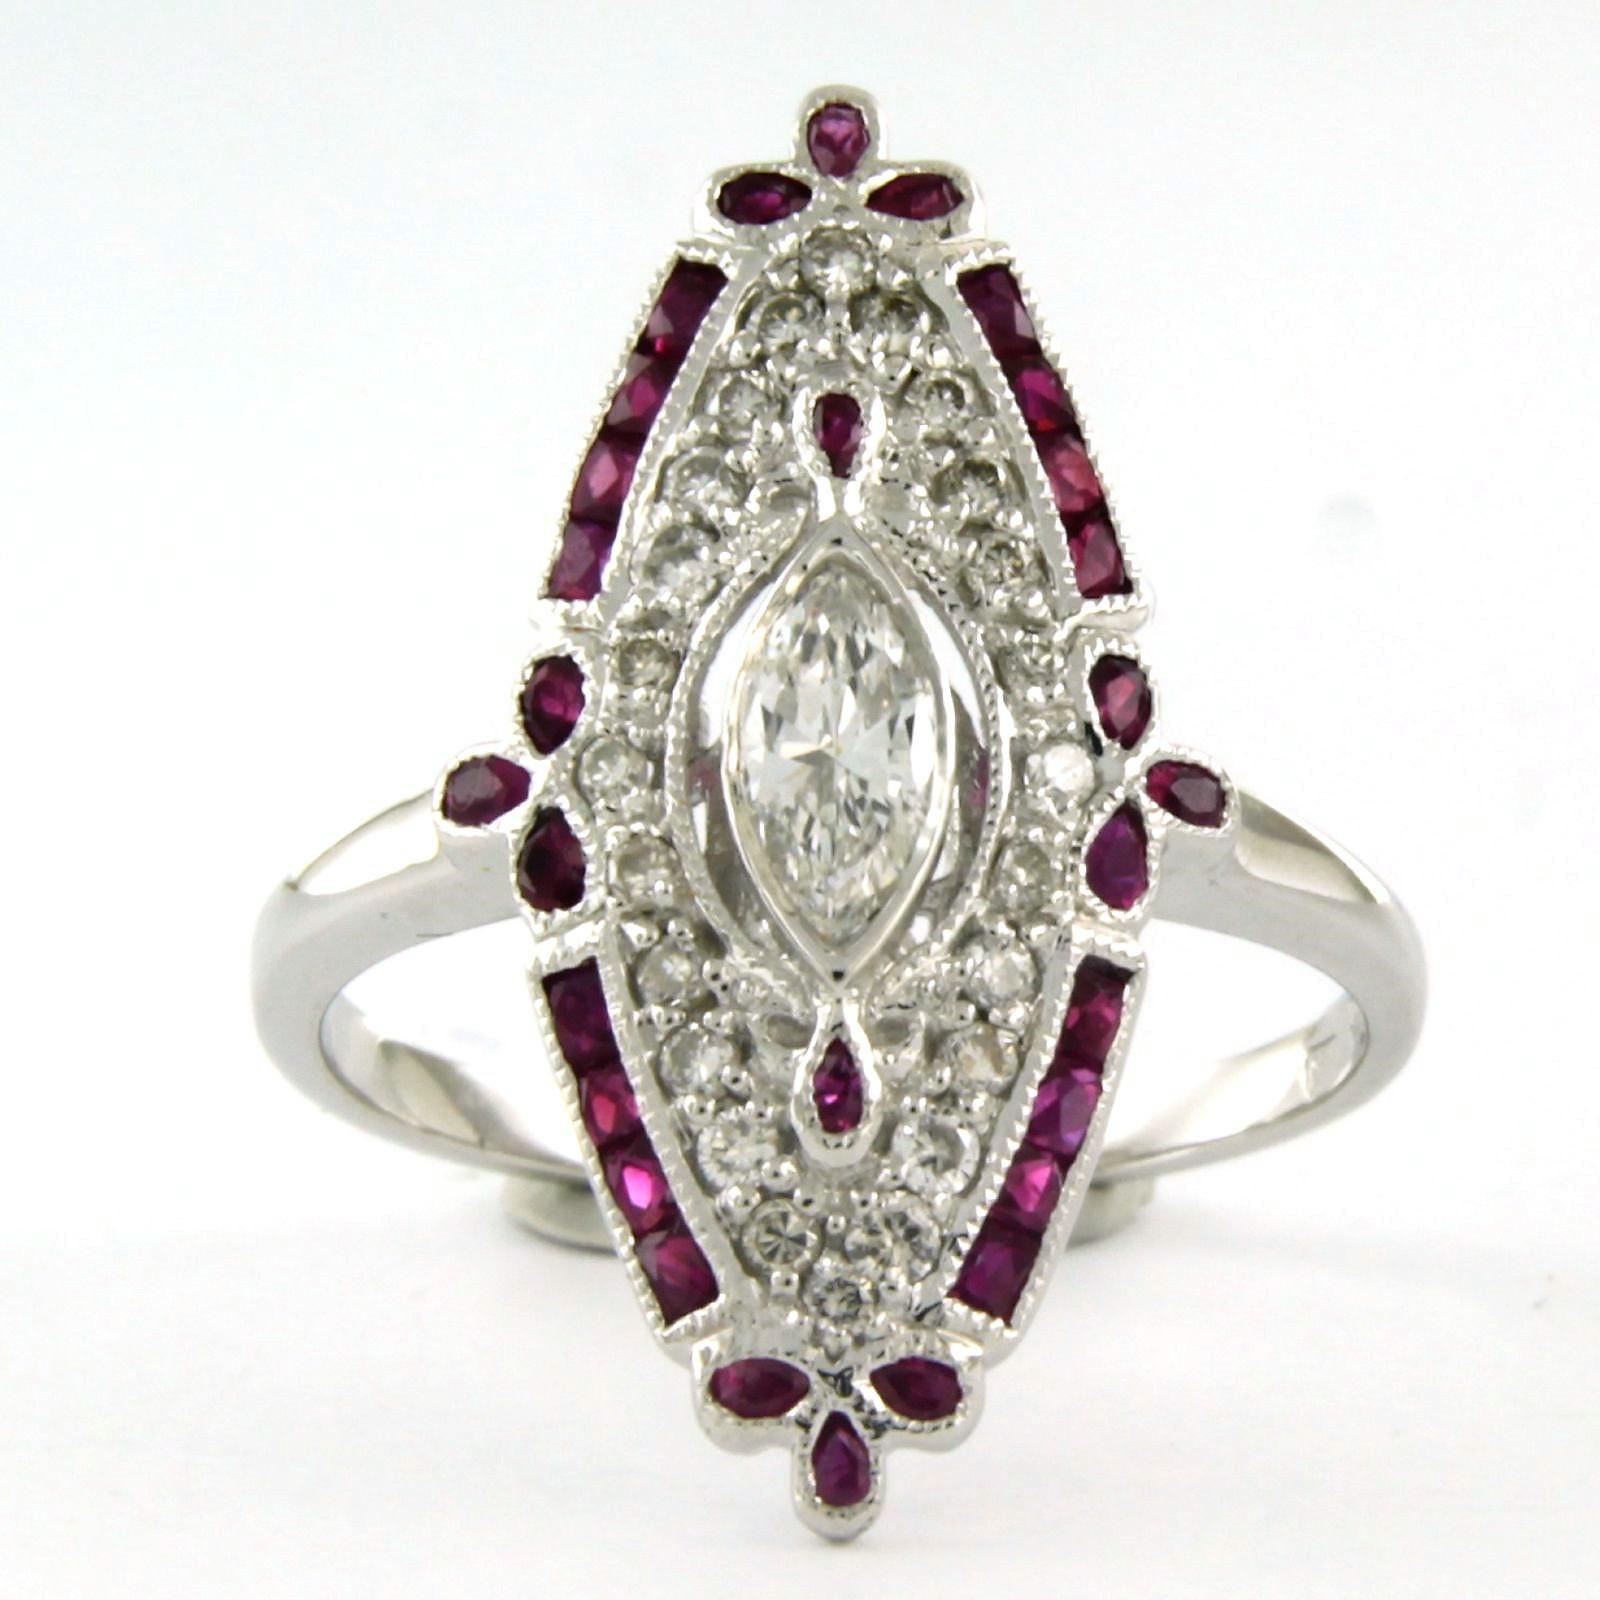 14k white gold ring set with ruby 1.06 ct, one marquise cut diamond 0.21 ct and brilliant cut diamond up to. 0.25ct - ring size U.S. 6.75 - EU. 17.25(54)

detailed description:

the top of the ring is 2.4 cm wide

weight: 3.5 grams

ring size  U.S.